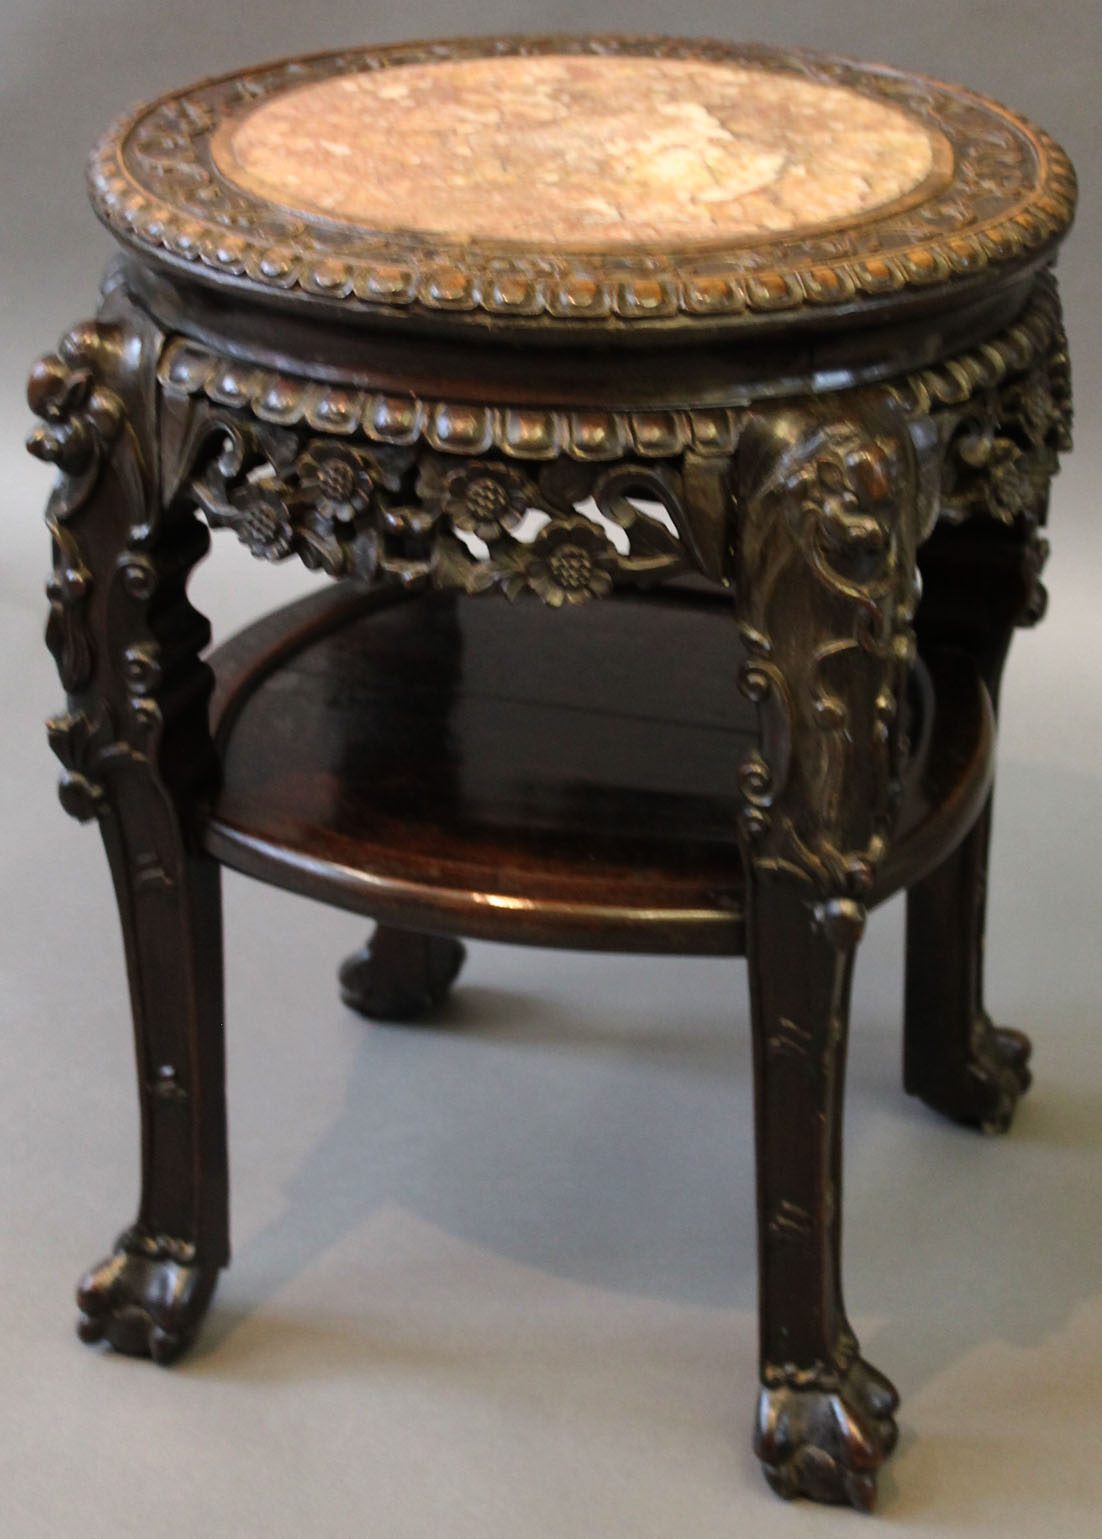 A Chinese hardwood and marble topped jardinière stand, late Qing dynasty (1644-1912), the circular